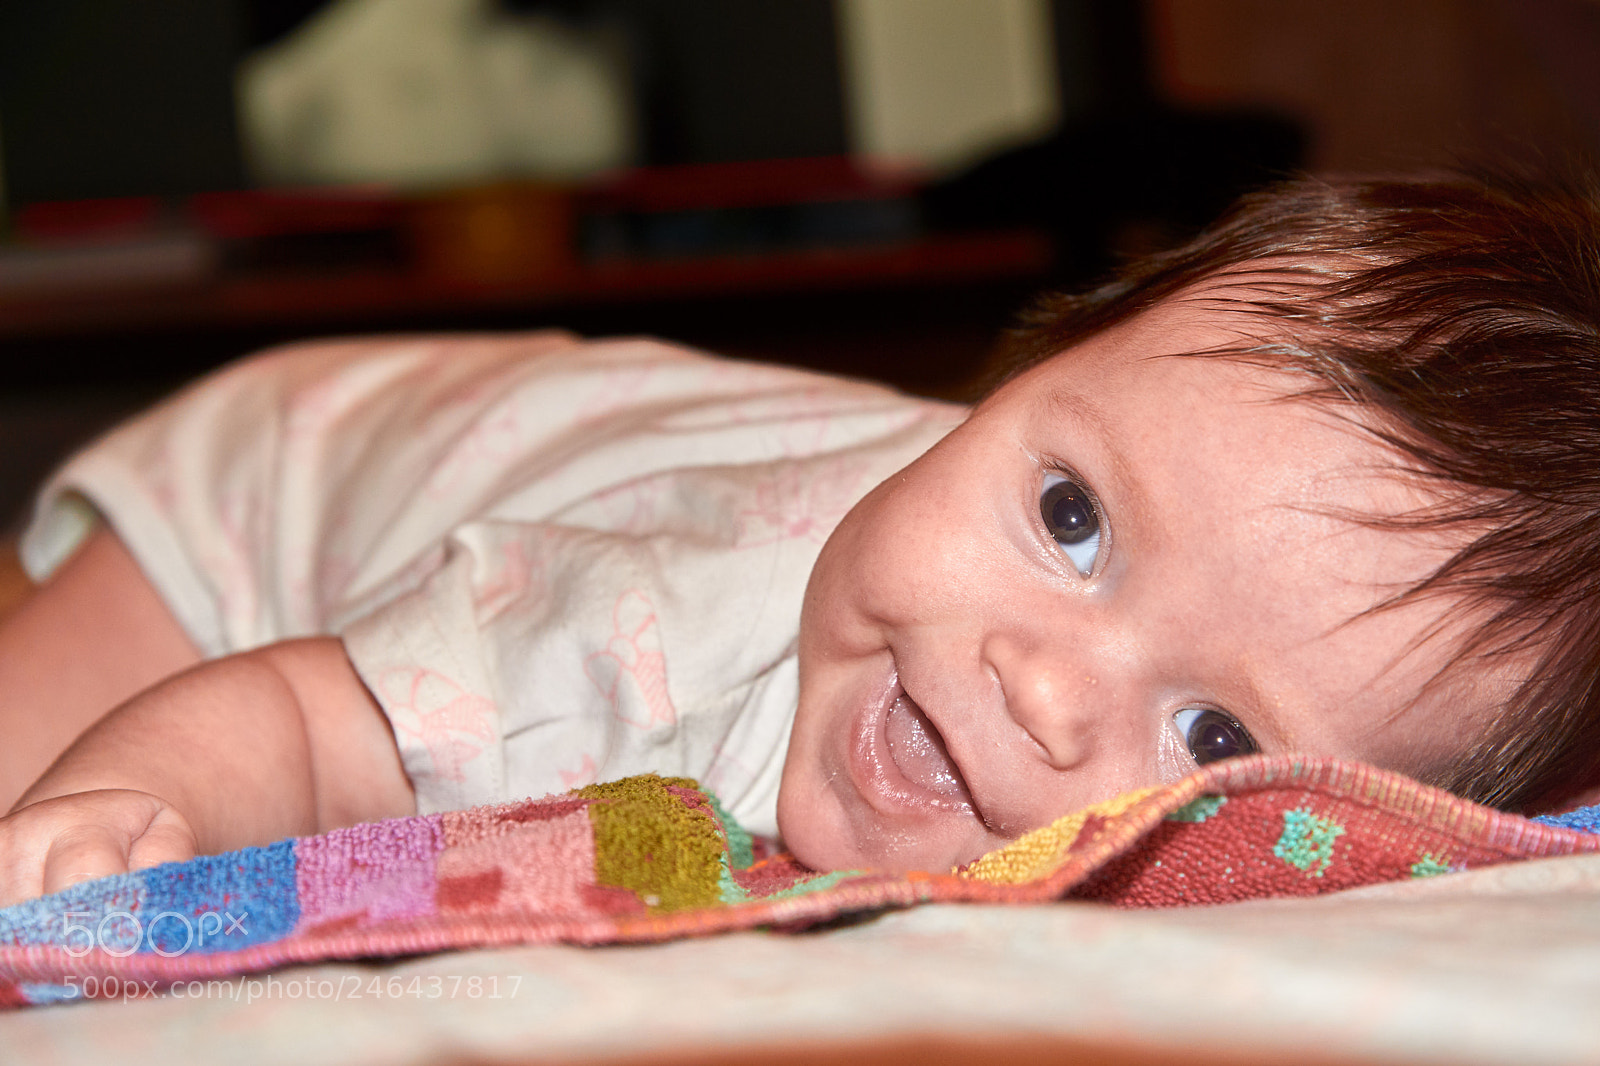 Sony SLT-A77 sample photo. A smiling baby photography